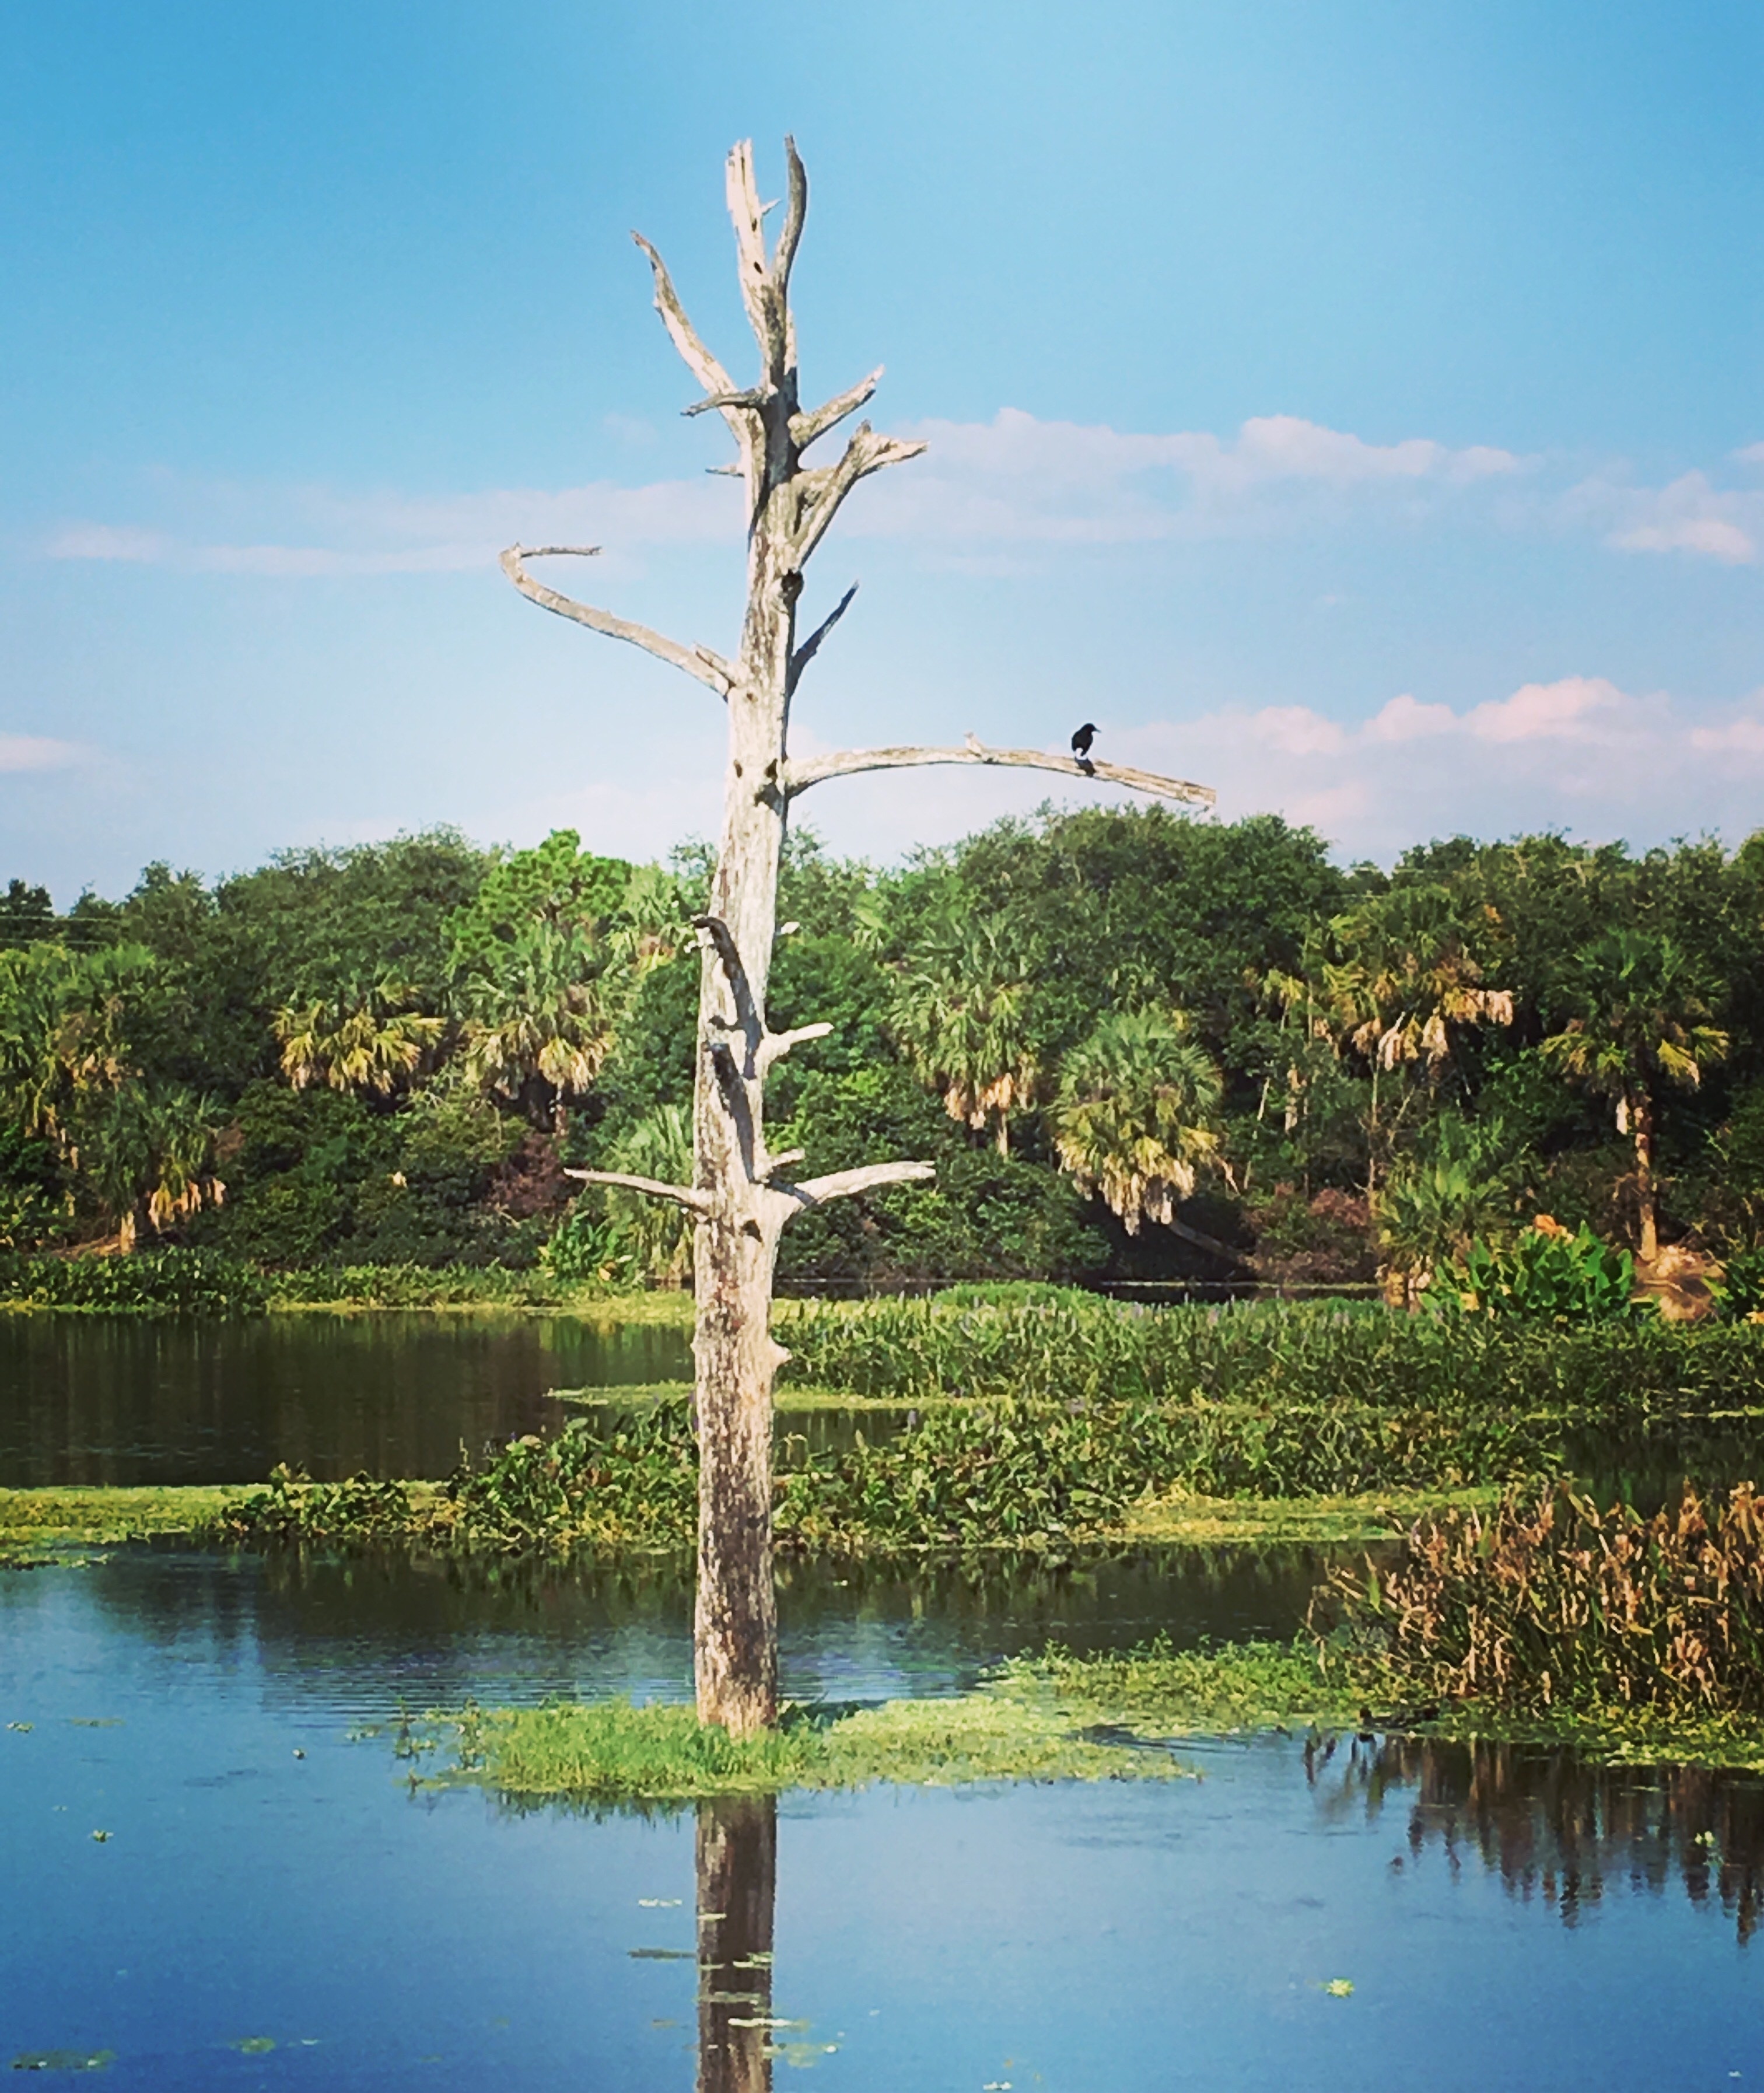 This is a beautiful place to view a variety of birds and other wildlife such as alligators, turtles, fish, rabbits and many flowers and trees while taking a walking tour. #adventure